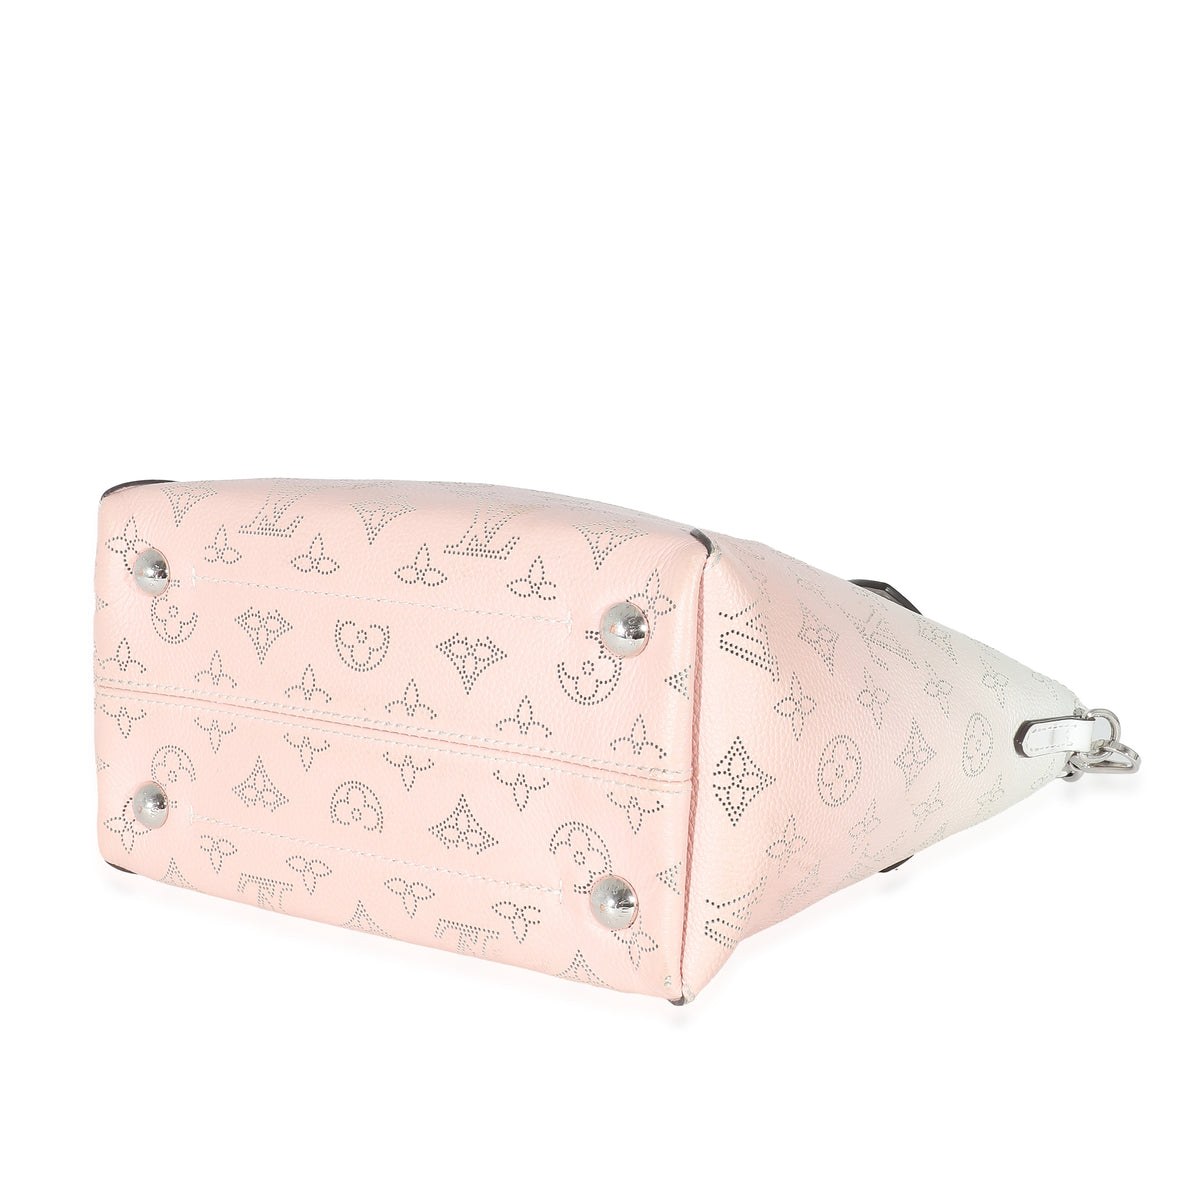 Louis Vuitton Mahina Pink Canvas Wallet (Pre-Owned)